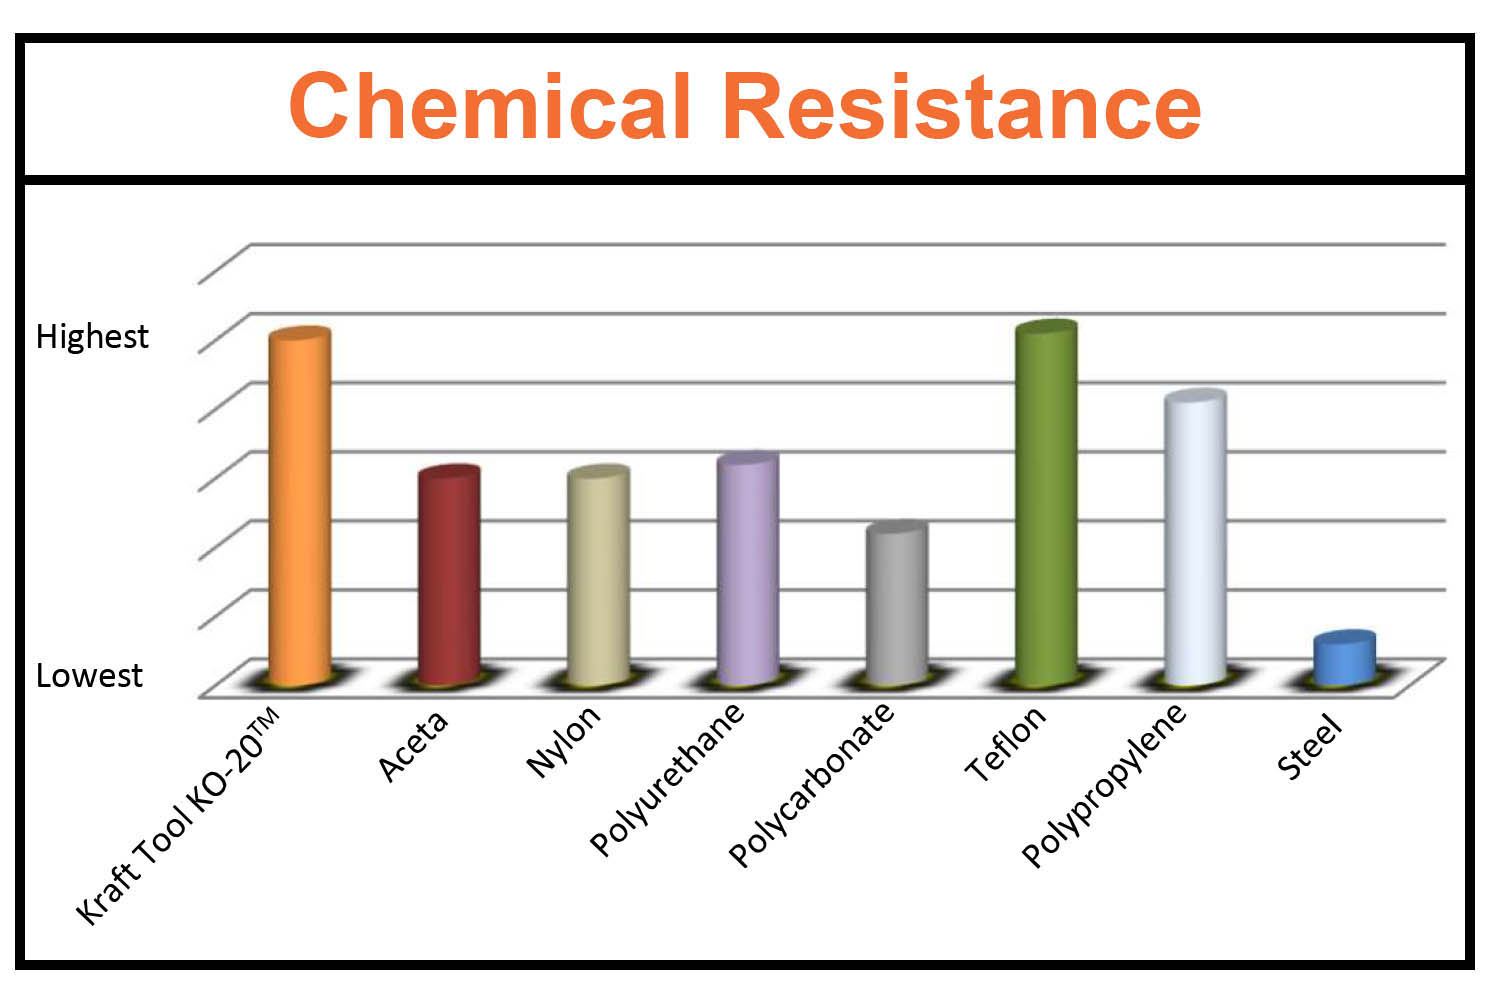 is resistant to many chemicals